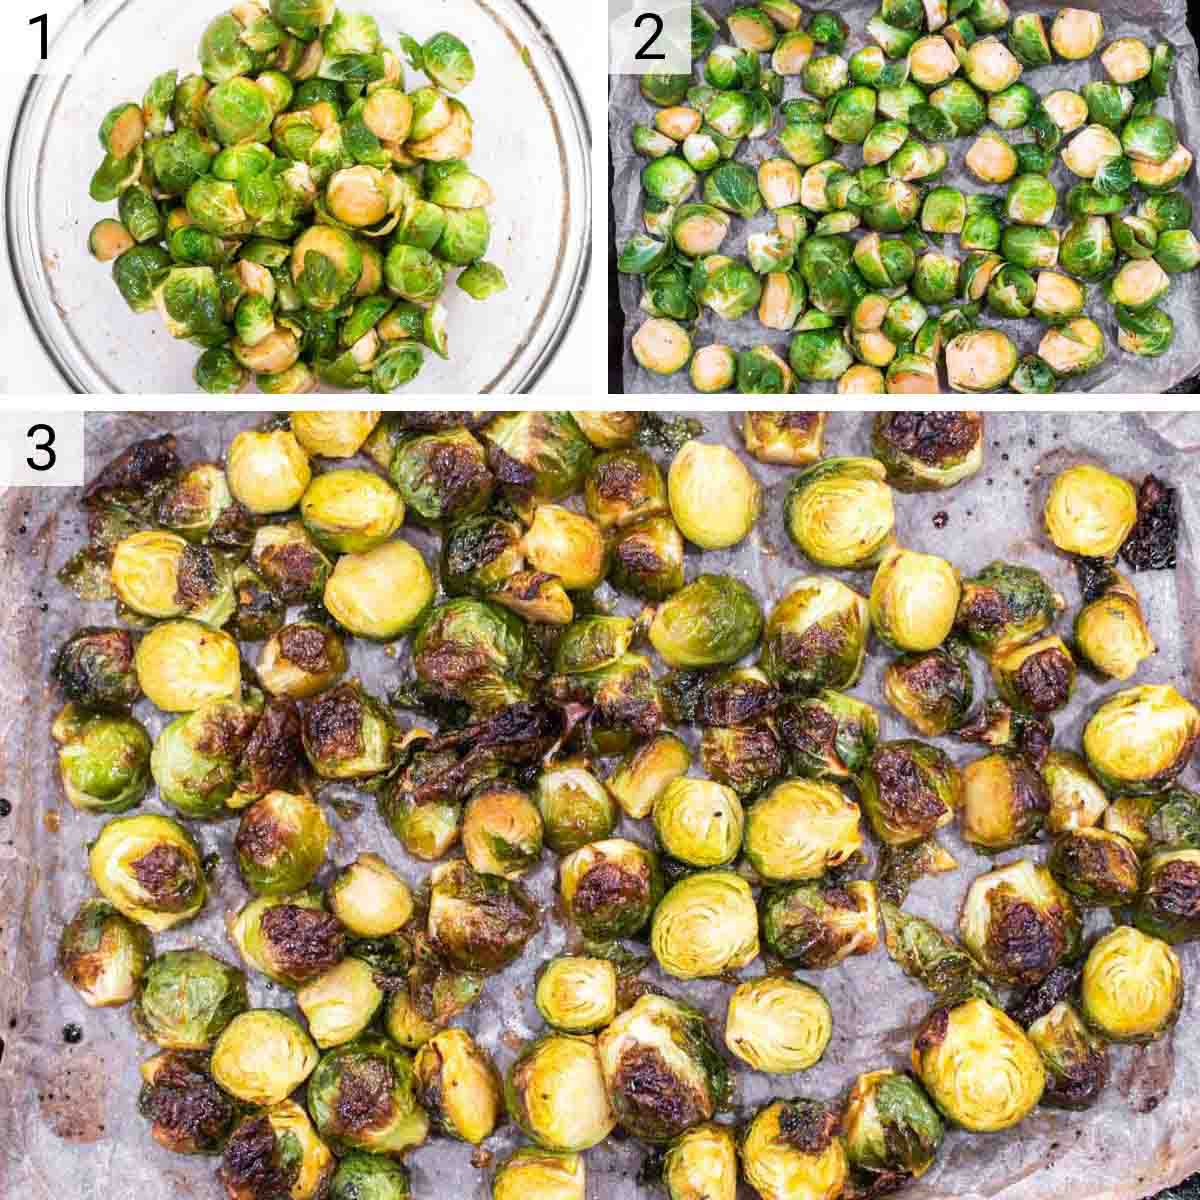 process shots of mixing Brussels sprouts with the ingredients and roasting in a pan